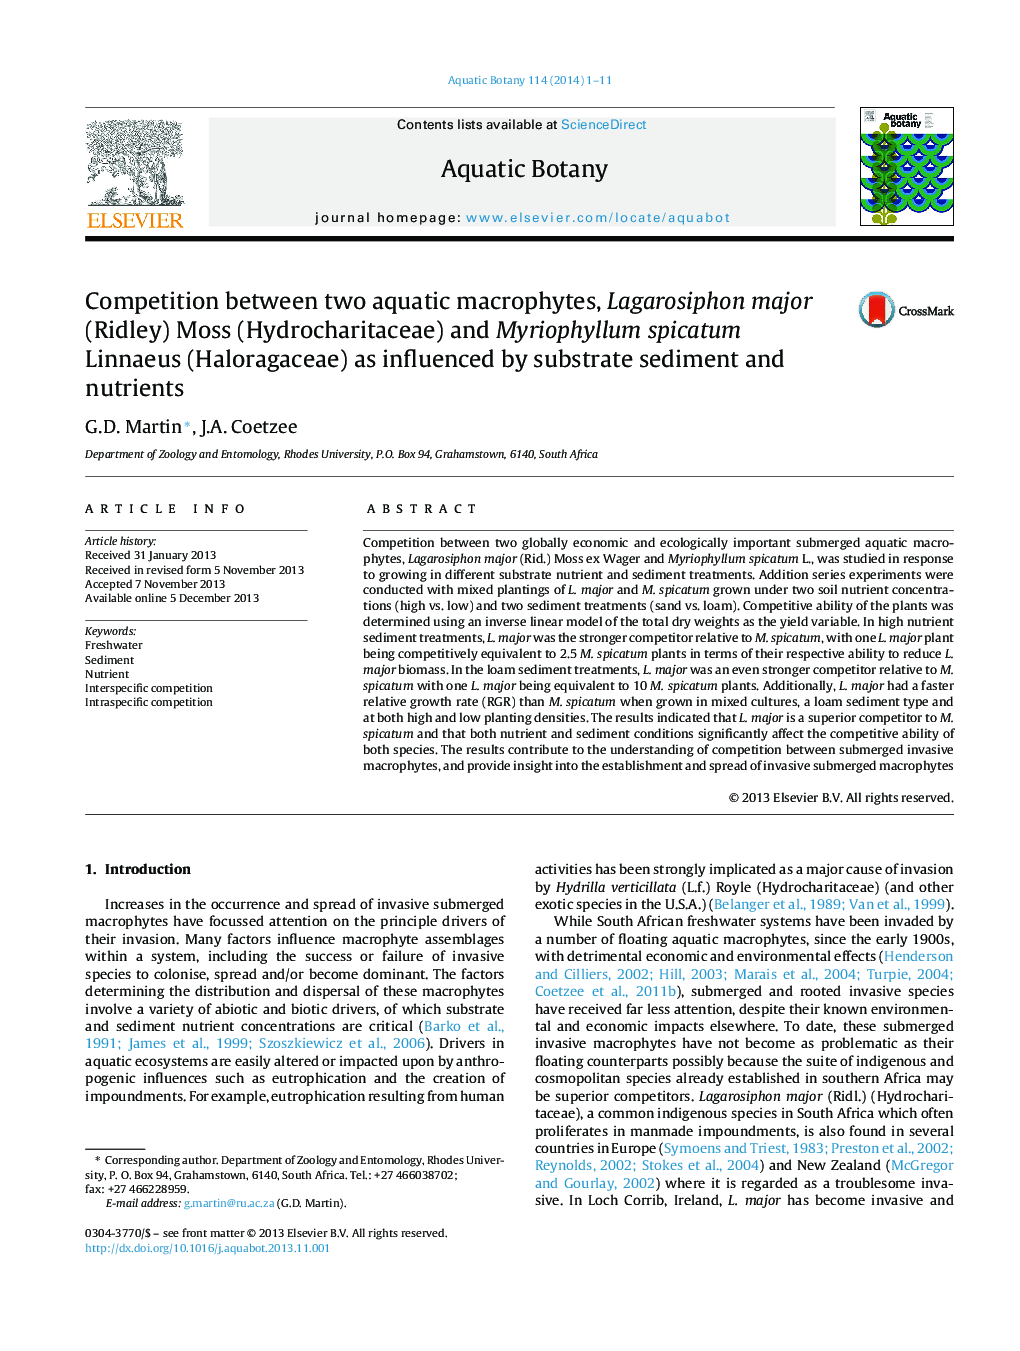 Competition between two aquatic macrophytes, Lagarosiphon major (Ridley) Moss (Hydrocharitaceae) and Myriophyllum spicatum Linnaeus (Haloragaceae) as influenced by substrate sediment and nutrients